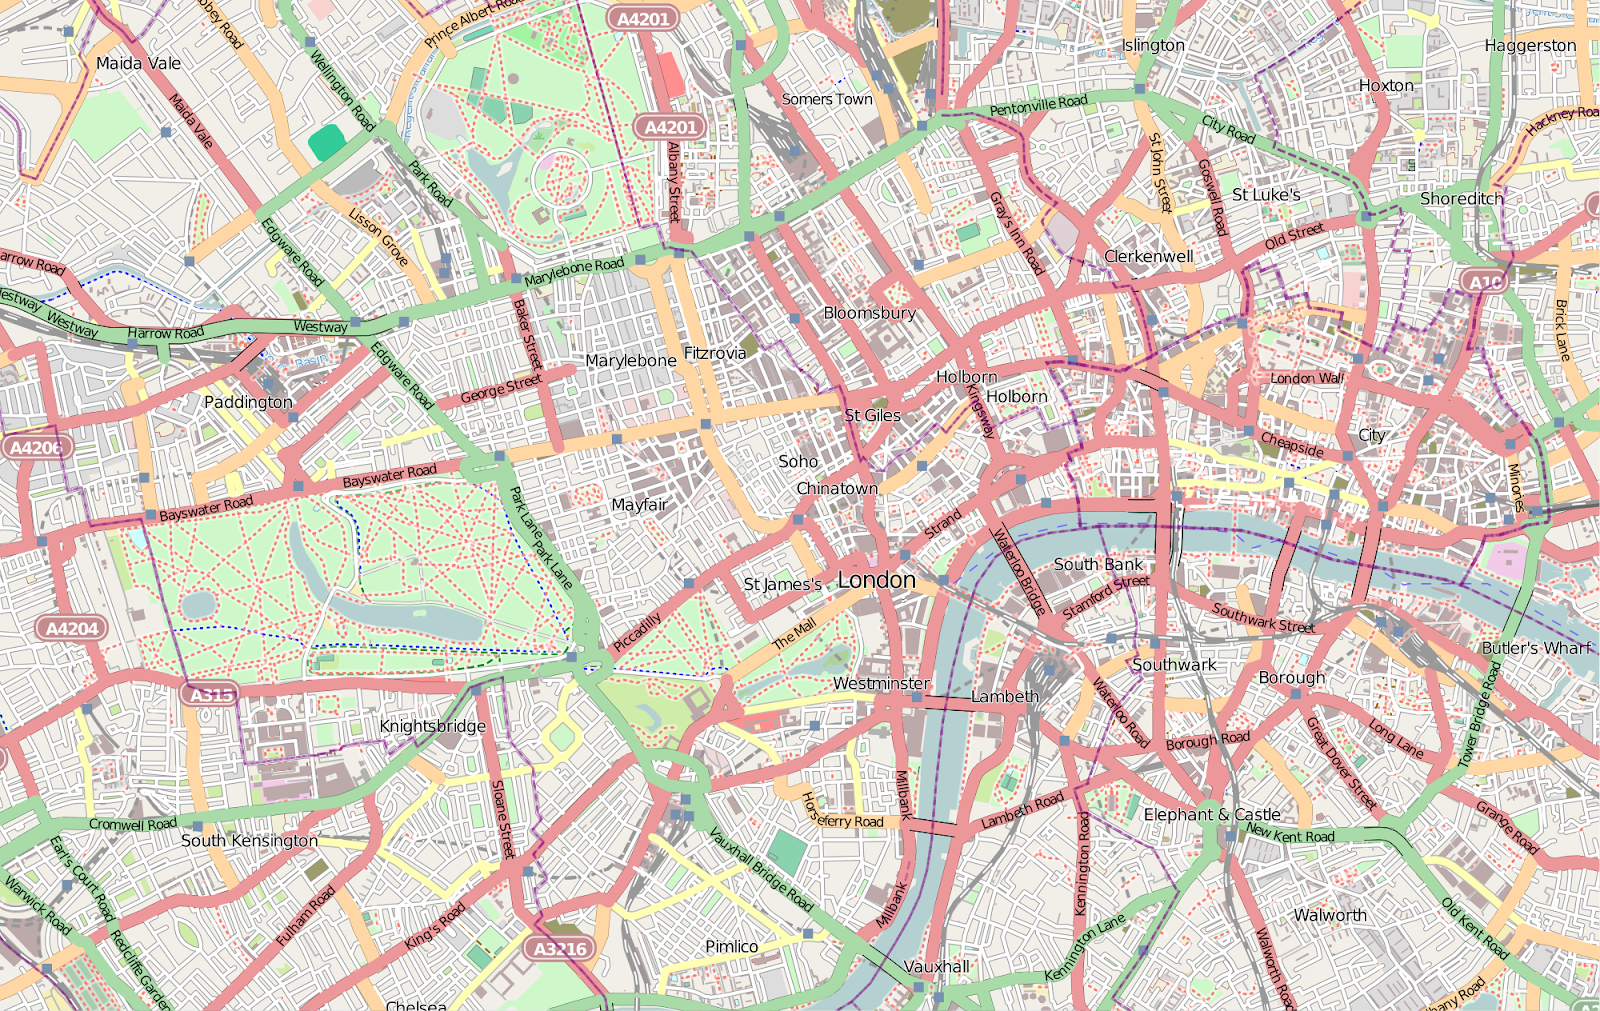 https://upload.wikimedia.org/wikipedia/commons/thumb/4/4b/Open_street_map_central_london.svg/2000px-Open_street_map_central_london.svg.png